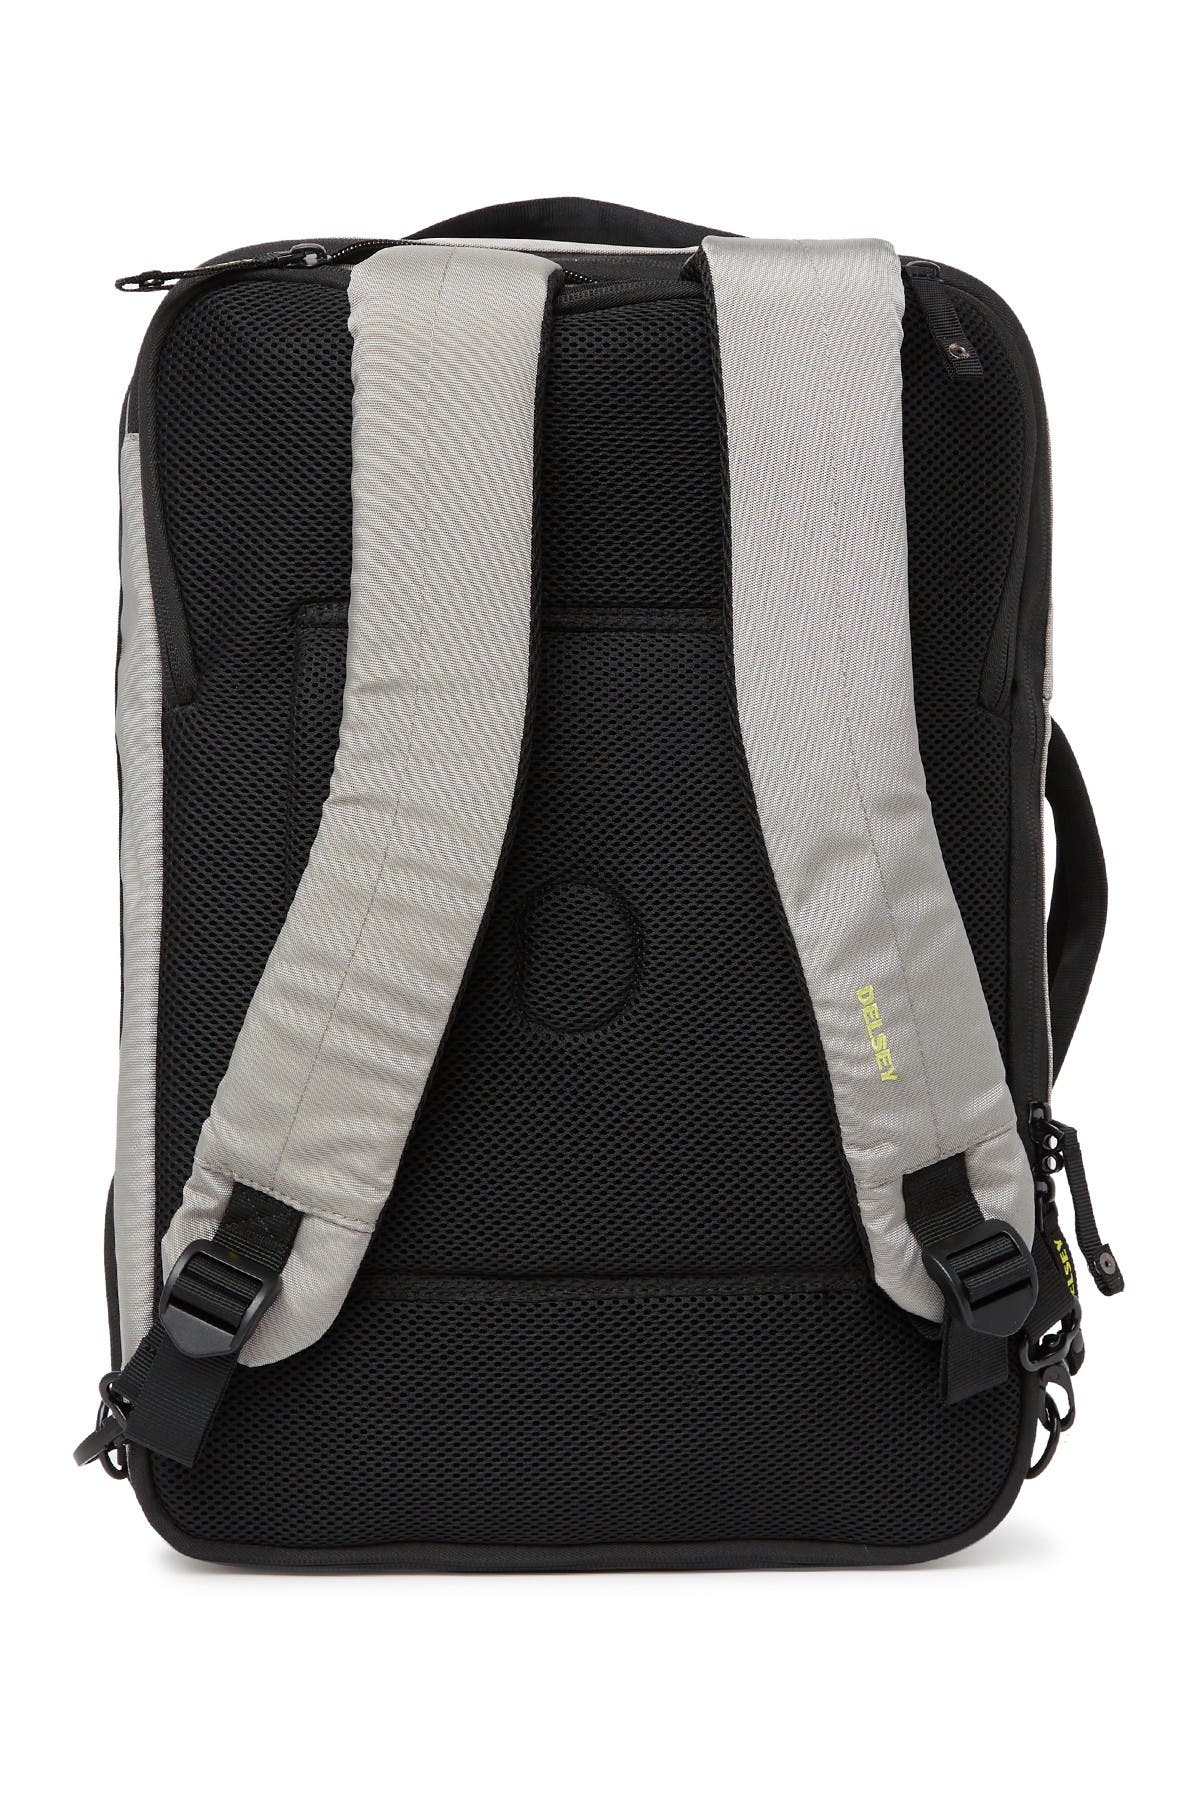 Delsey Daily's 2 Compartment 15.6-inch Laptop Backpack In Medium Grey